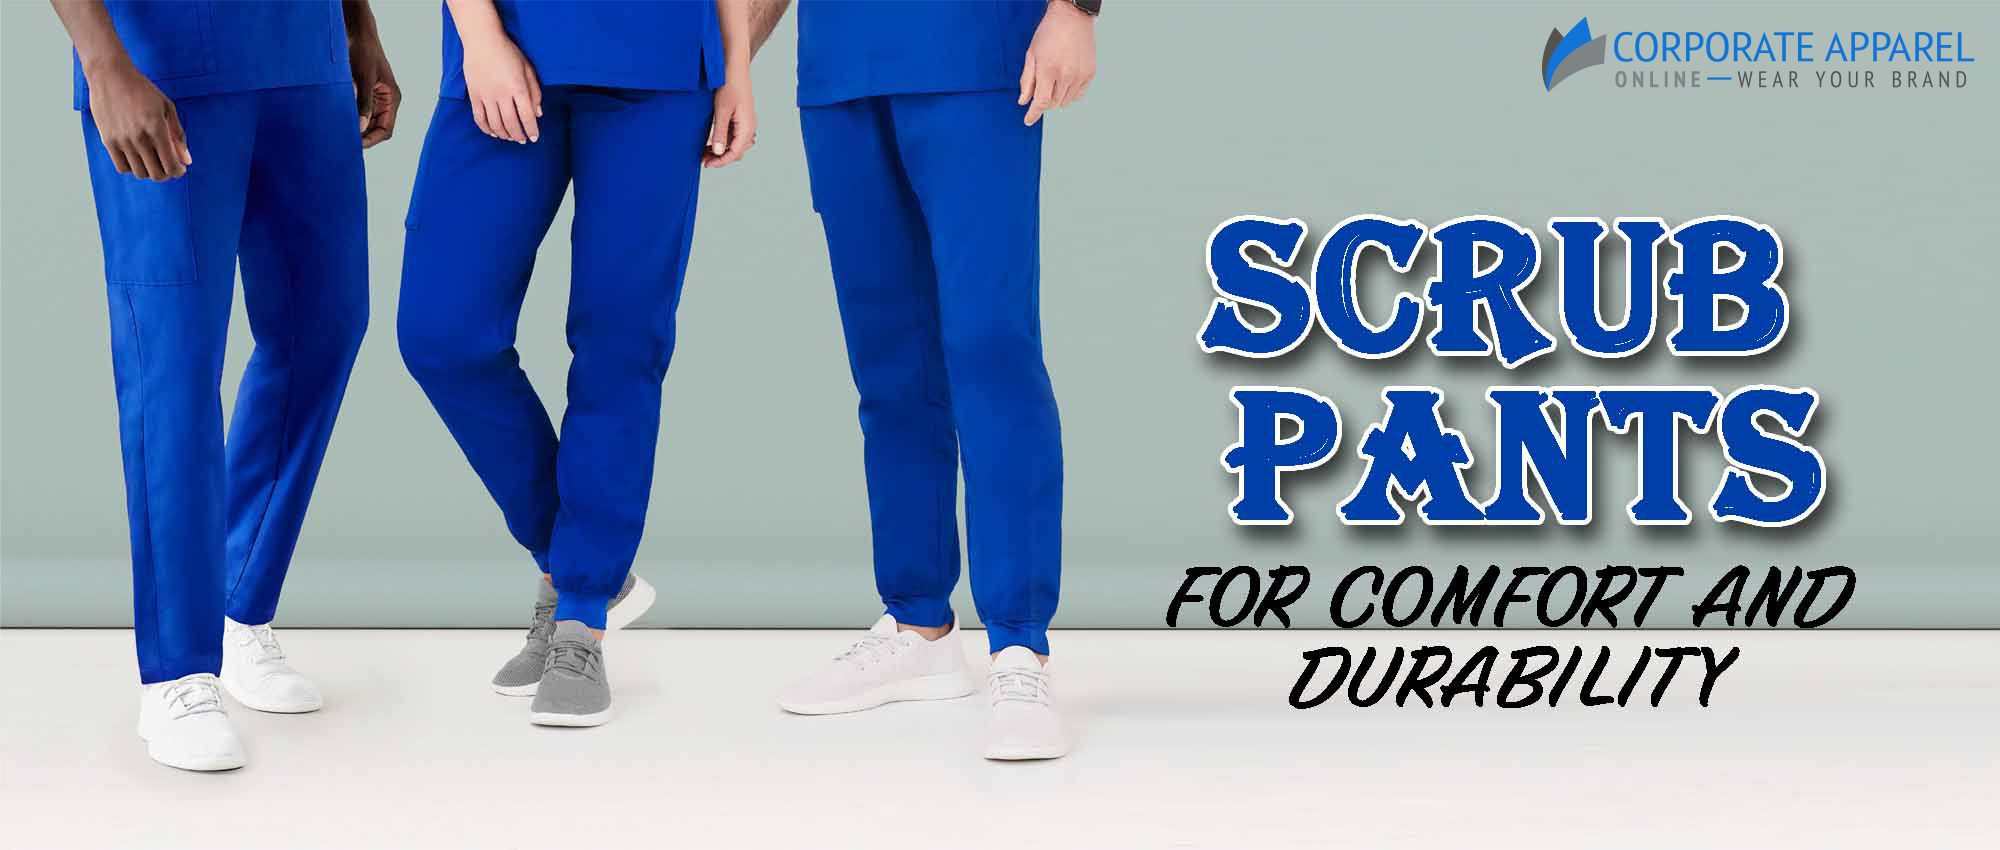 Scrub Bottoms - Products